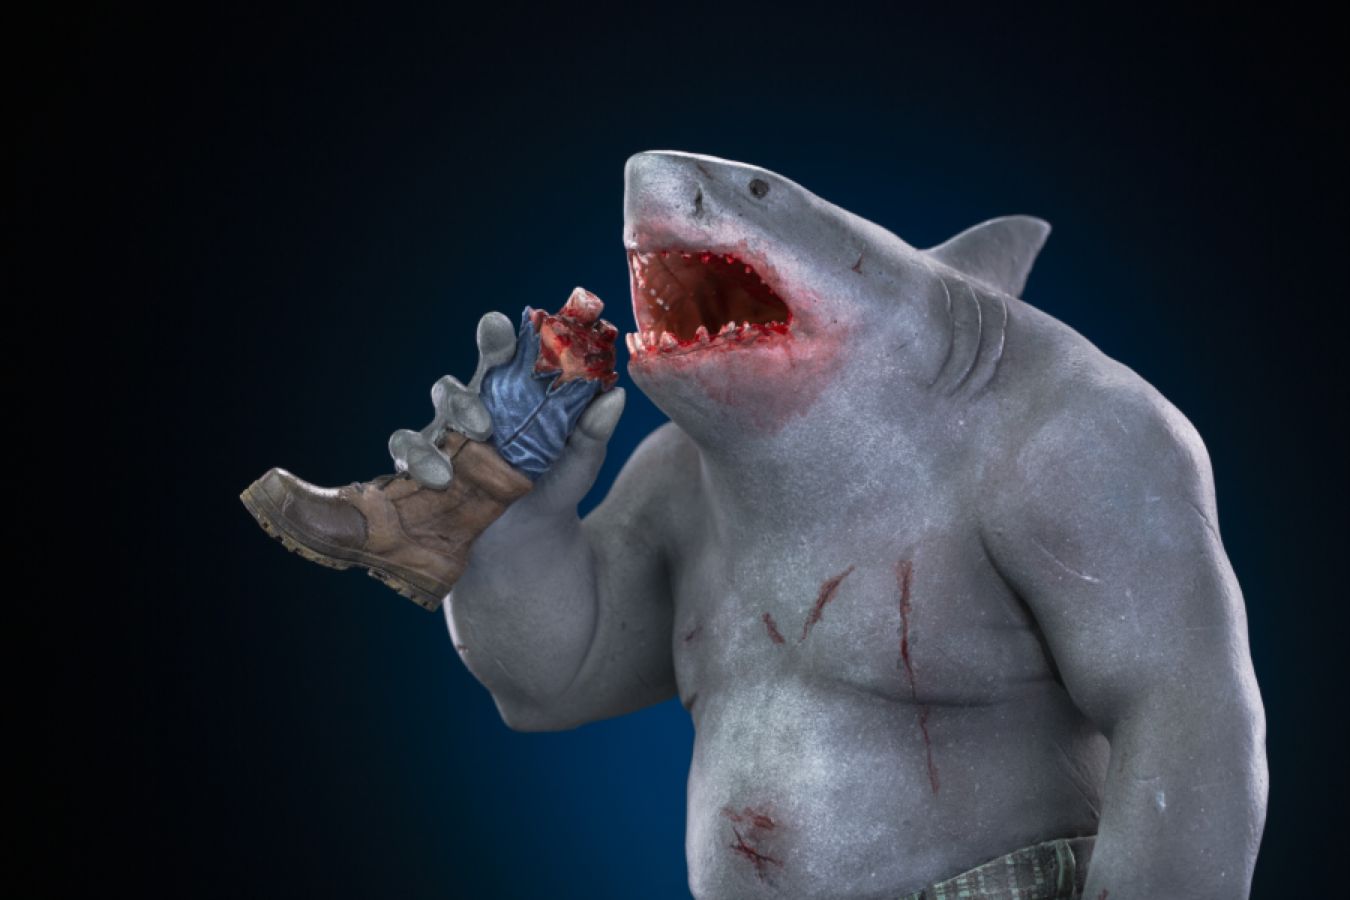 The Suicide Squad - King Shark 1:10 Scale Statue